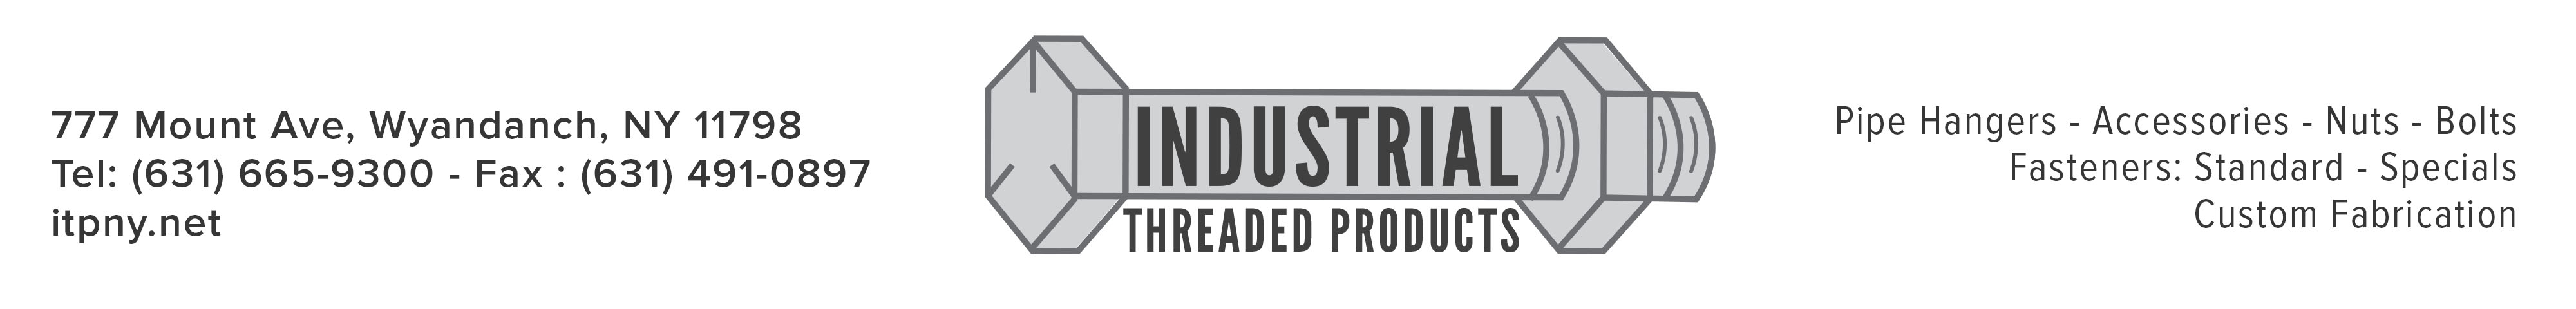 Industrial Threaded Products